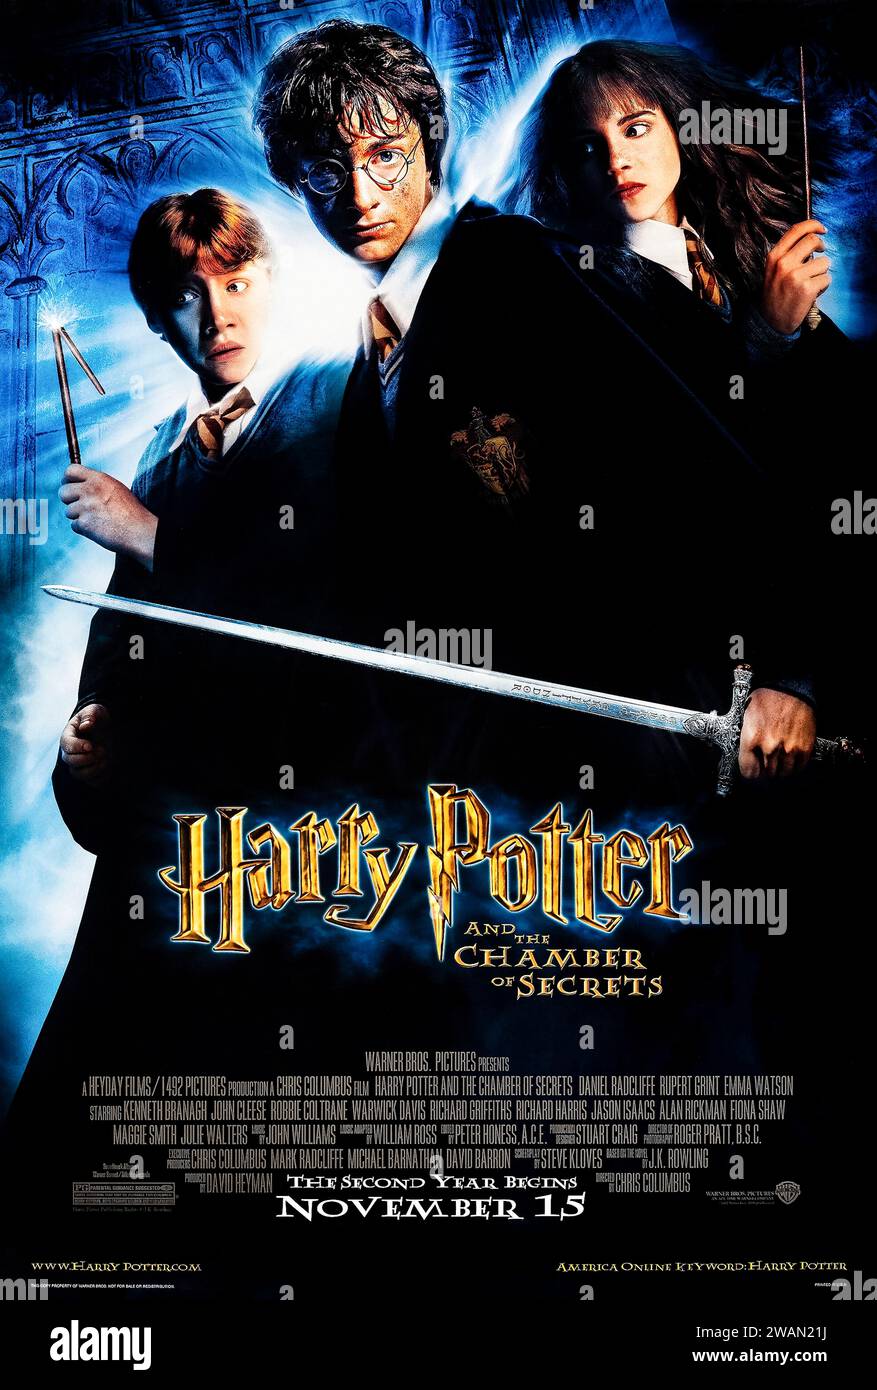 Harry Potter and the Chamber of Secrets (2004) directed by Chris Columbus and starring Daniel Radcliffe, Emma Watson, Rupert Grint and Gary Oldman. Harry Potter, Ron and Hermione return to Hogwarts School of Witchcraft and Wizardry for their third year of study, where they delve into the mystery surrounding an escaped prisoner who poses a dangerous threat to the young wizard. Photograph of an original 2004 US one sheet poster. ***EDITORIAL USE ONLY*** Credit: BFA / Warner Bros Stock Photo